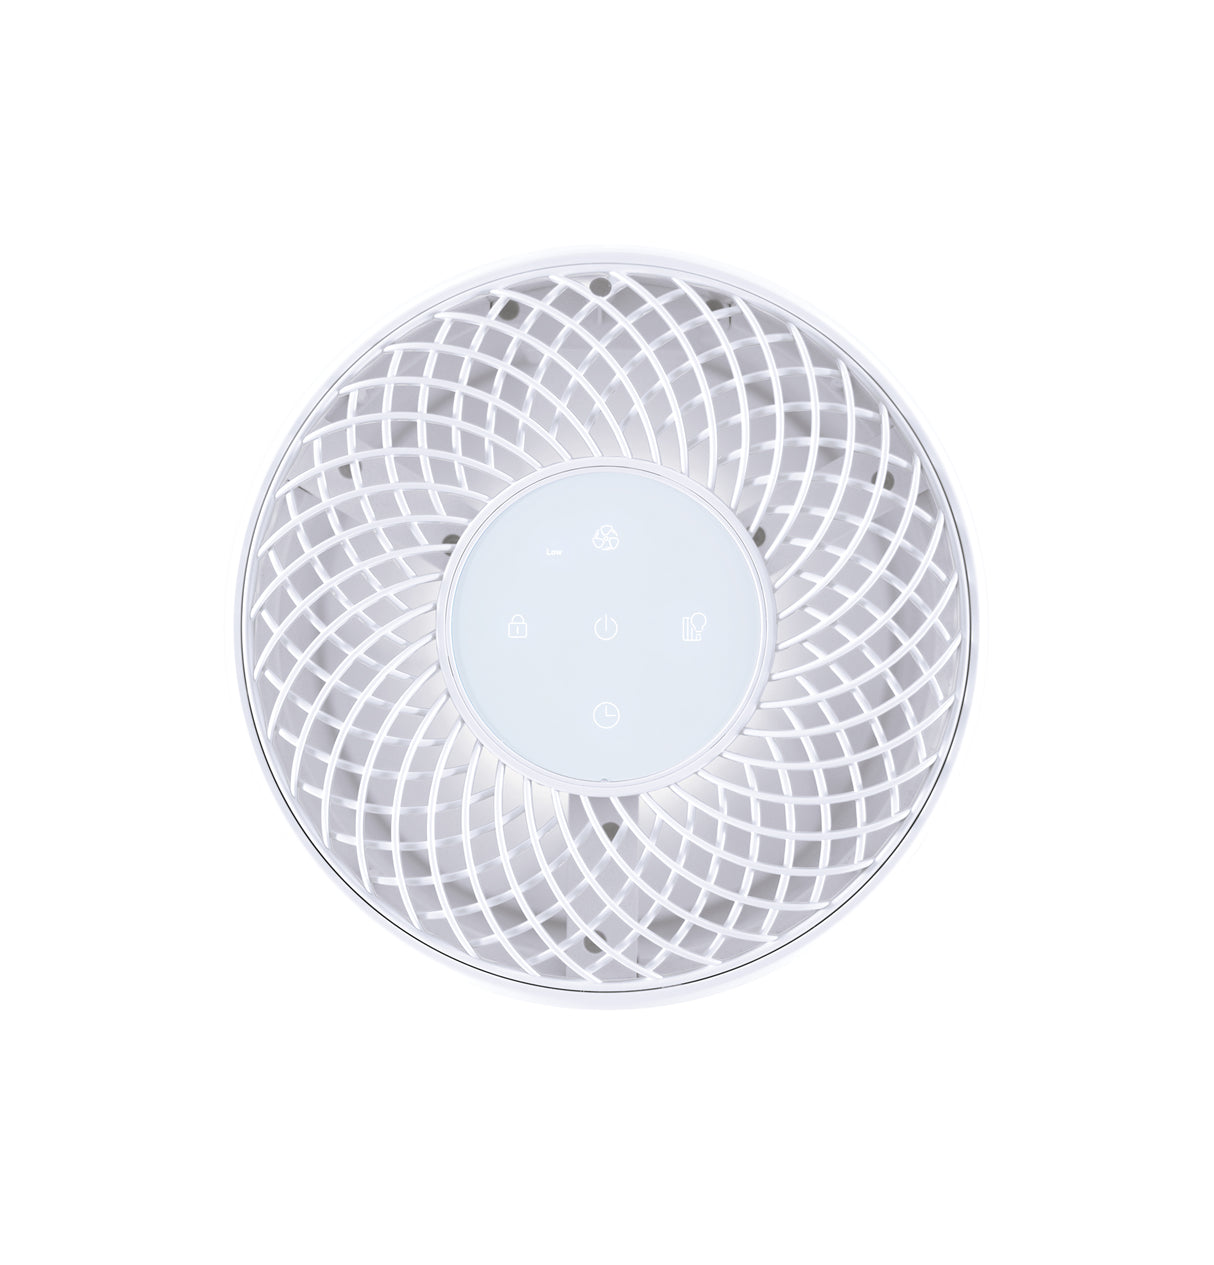 Profile Air Purifier for Small Rooms, White - (PFTS06AA)